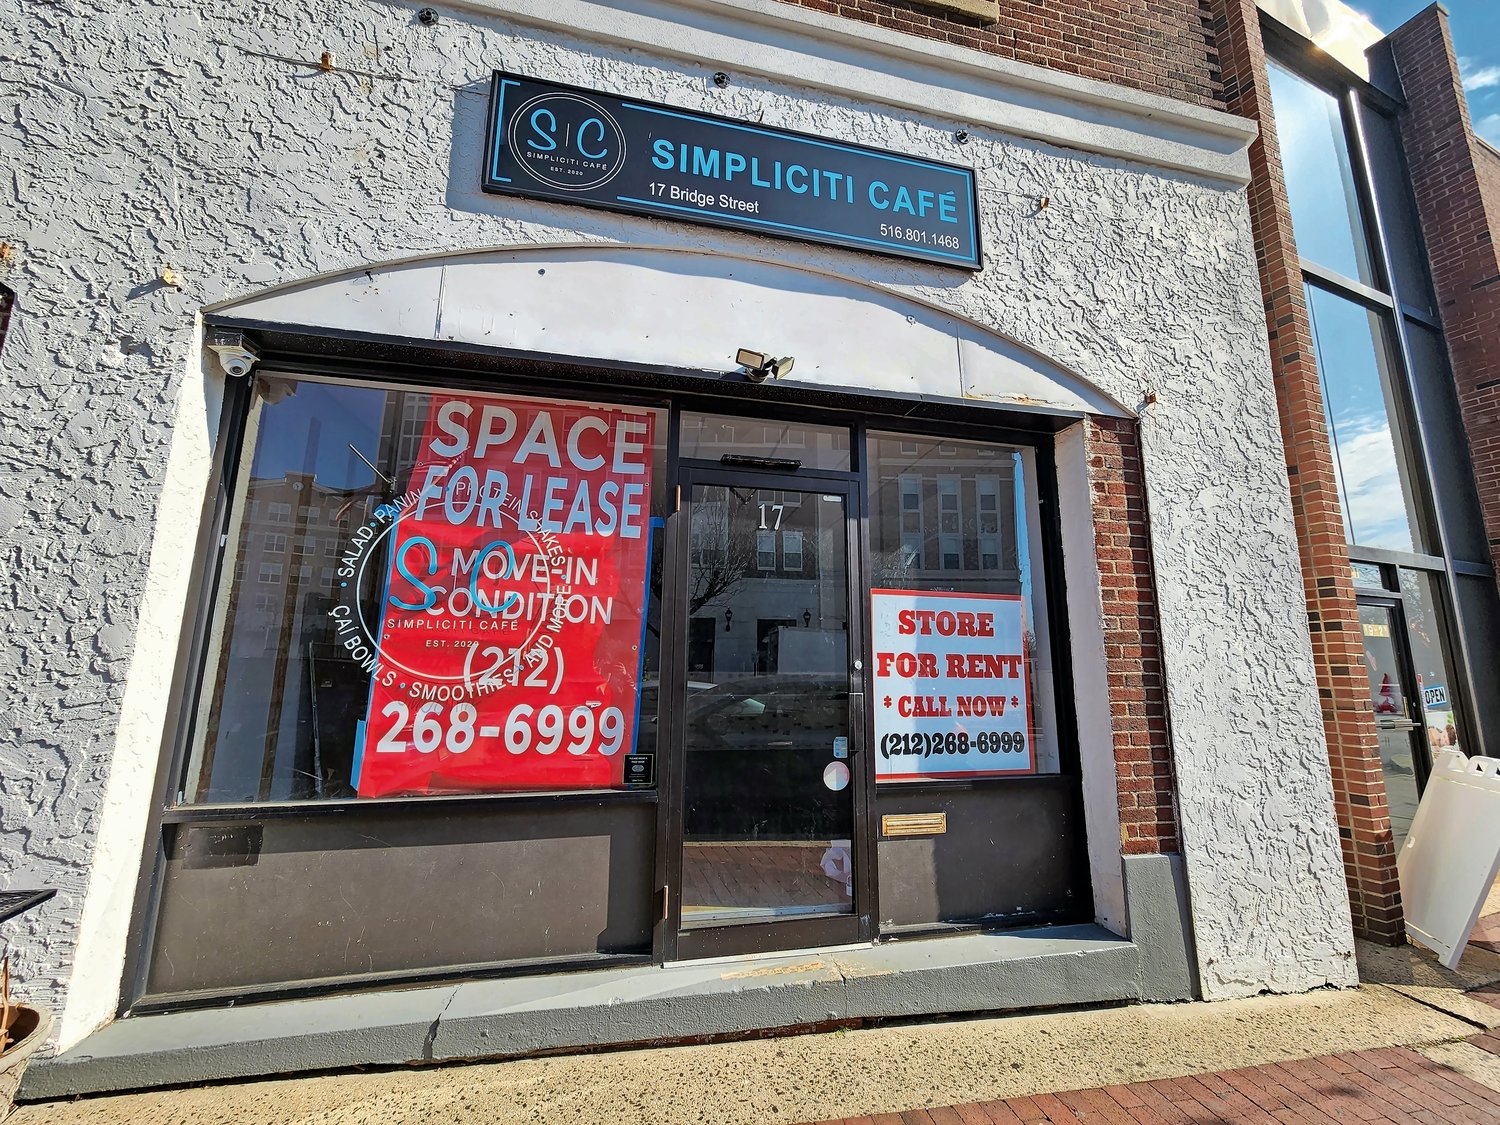 Vacant storefronts in the city’s commercial district might be required to register on the city’s website. Property owners are conflicted about the potential online database, saying they don’t want any additional fees.